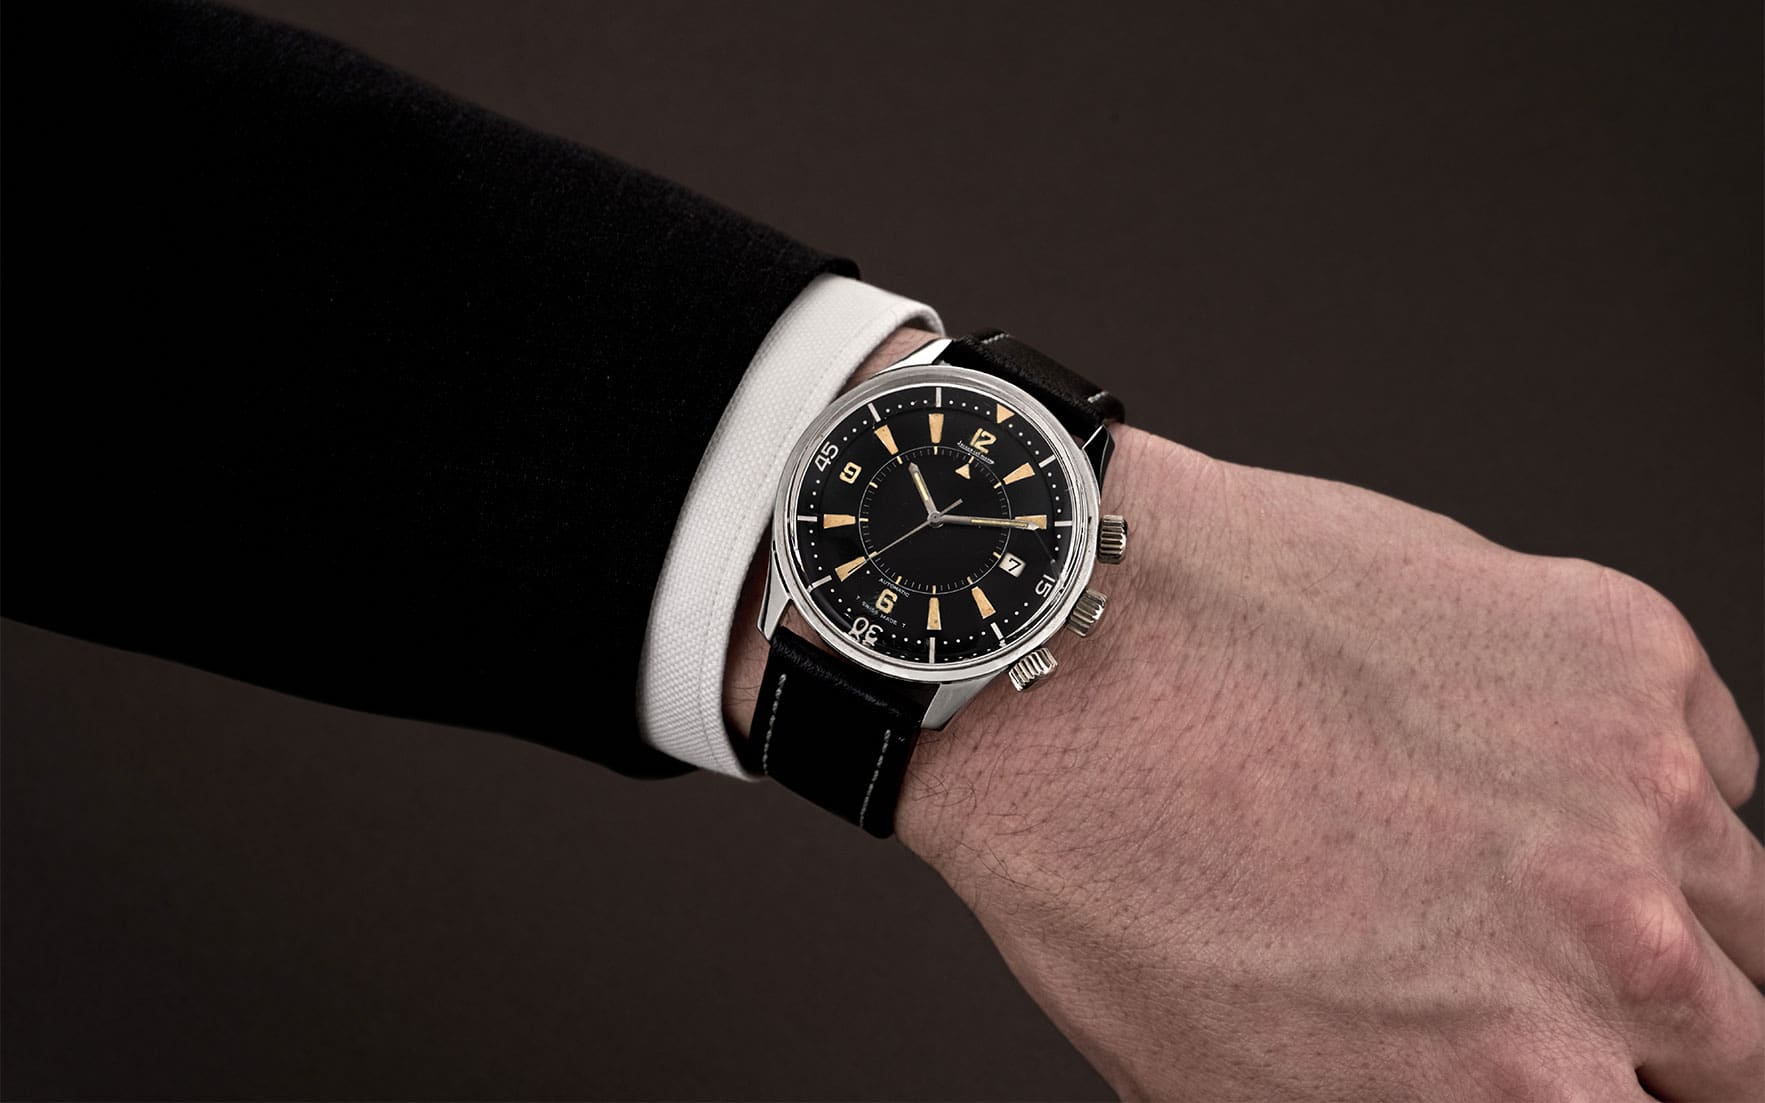 INSIGHT: Looking back at the Jaeger-LeCoultre Polaris